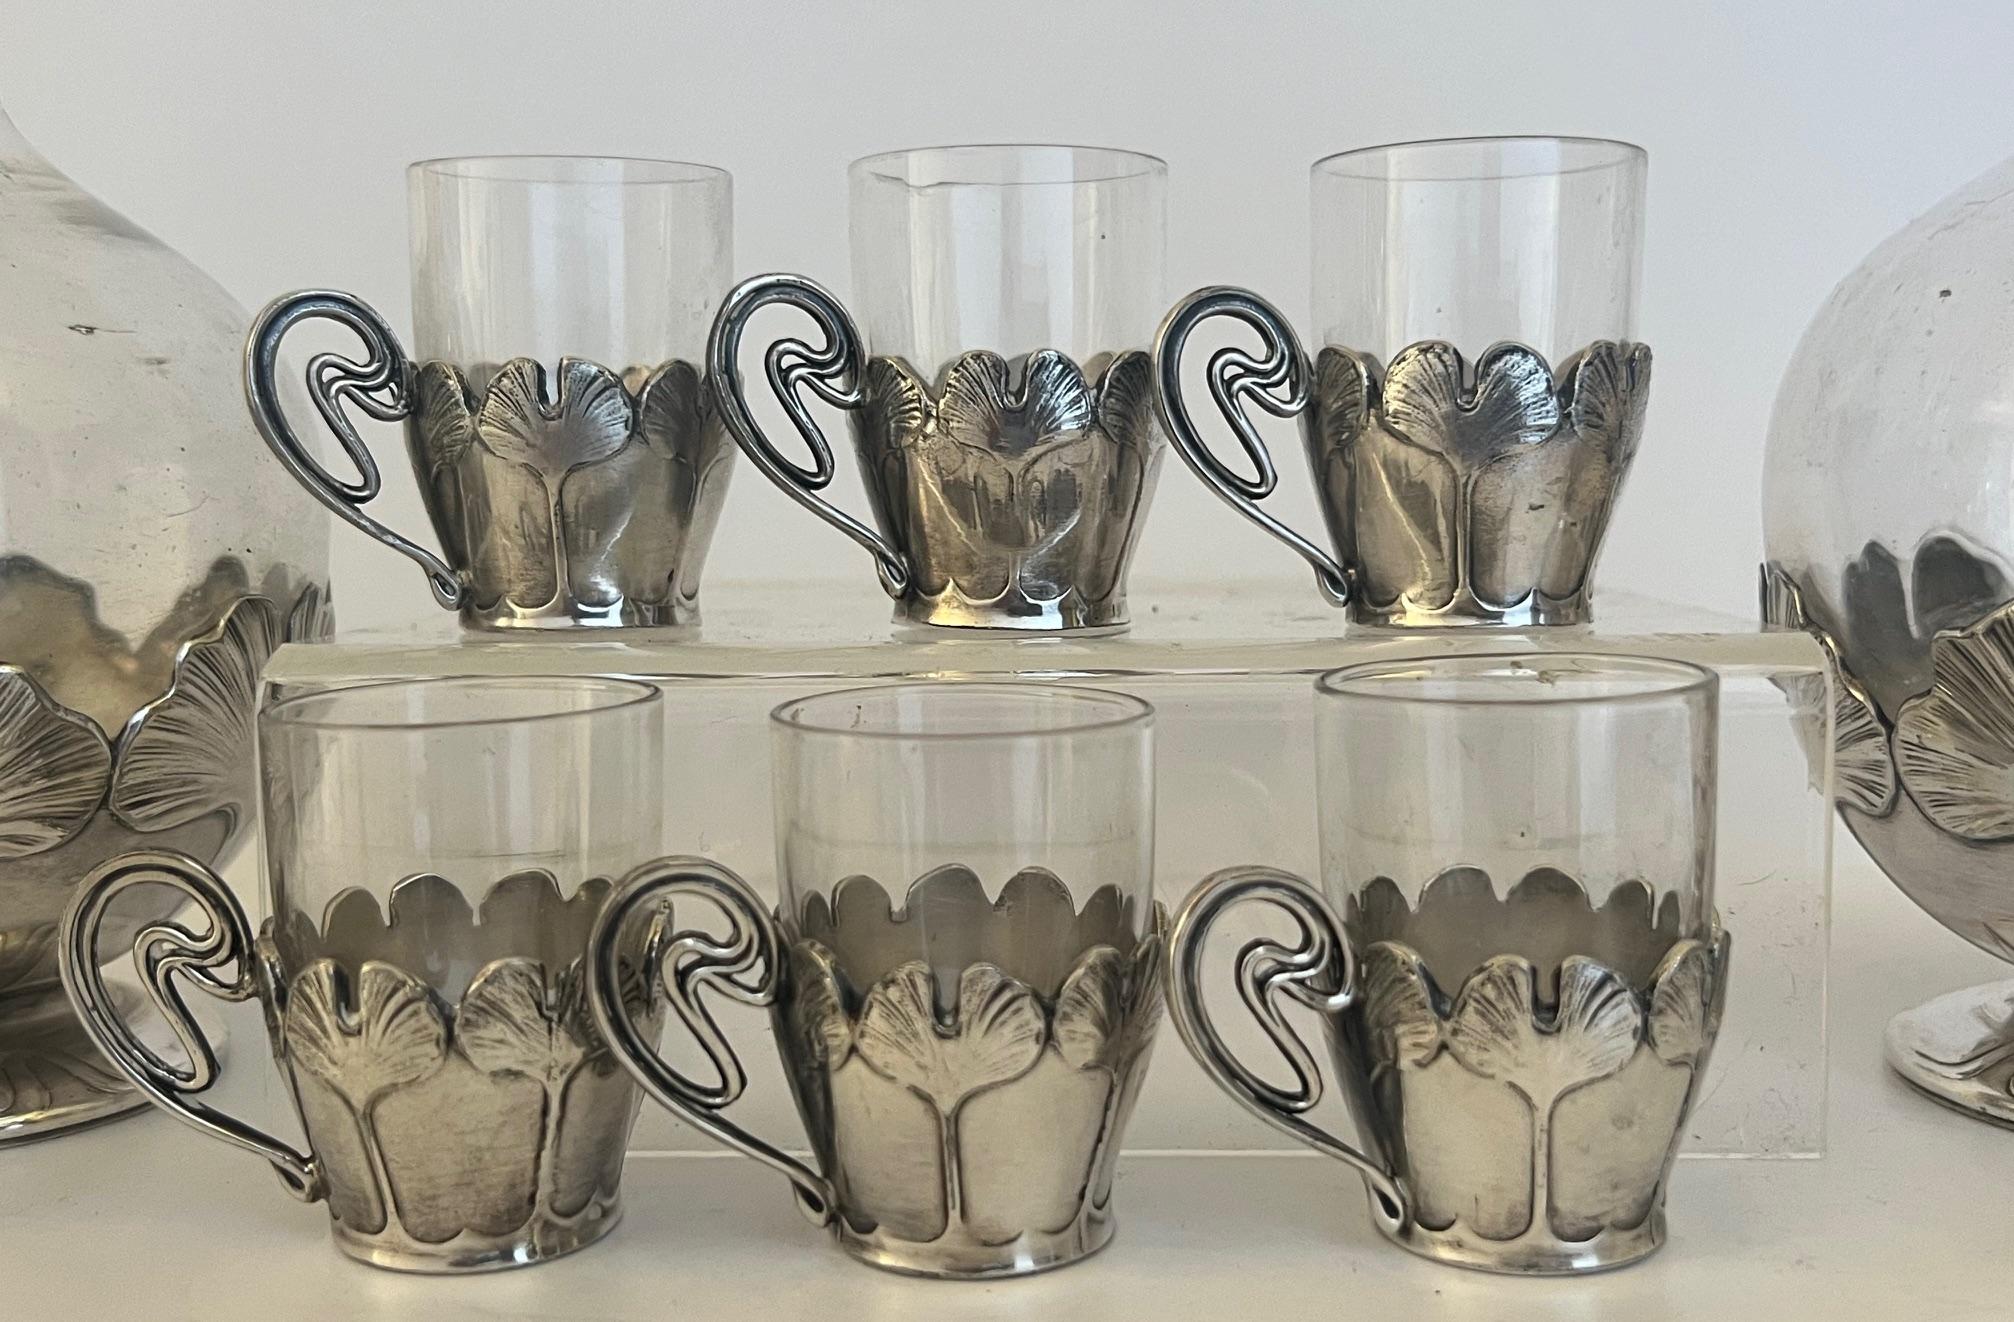 Early 20th Century Christofle Art Nouveau Decanter and Glass Set of 8 For Sale 9